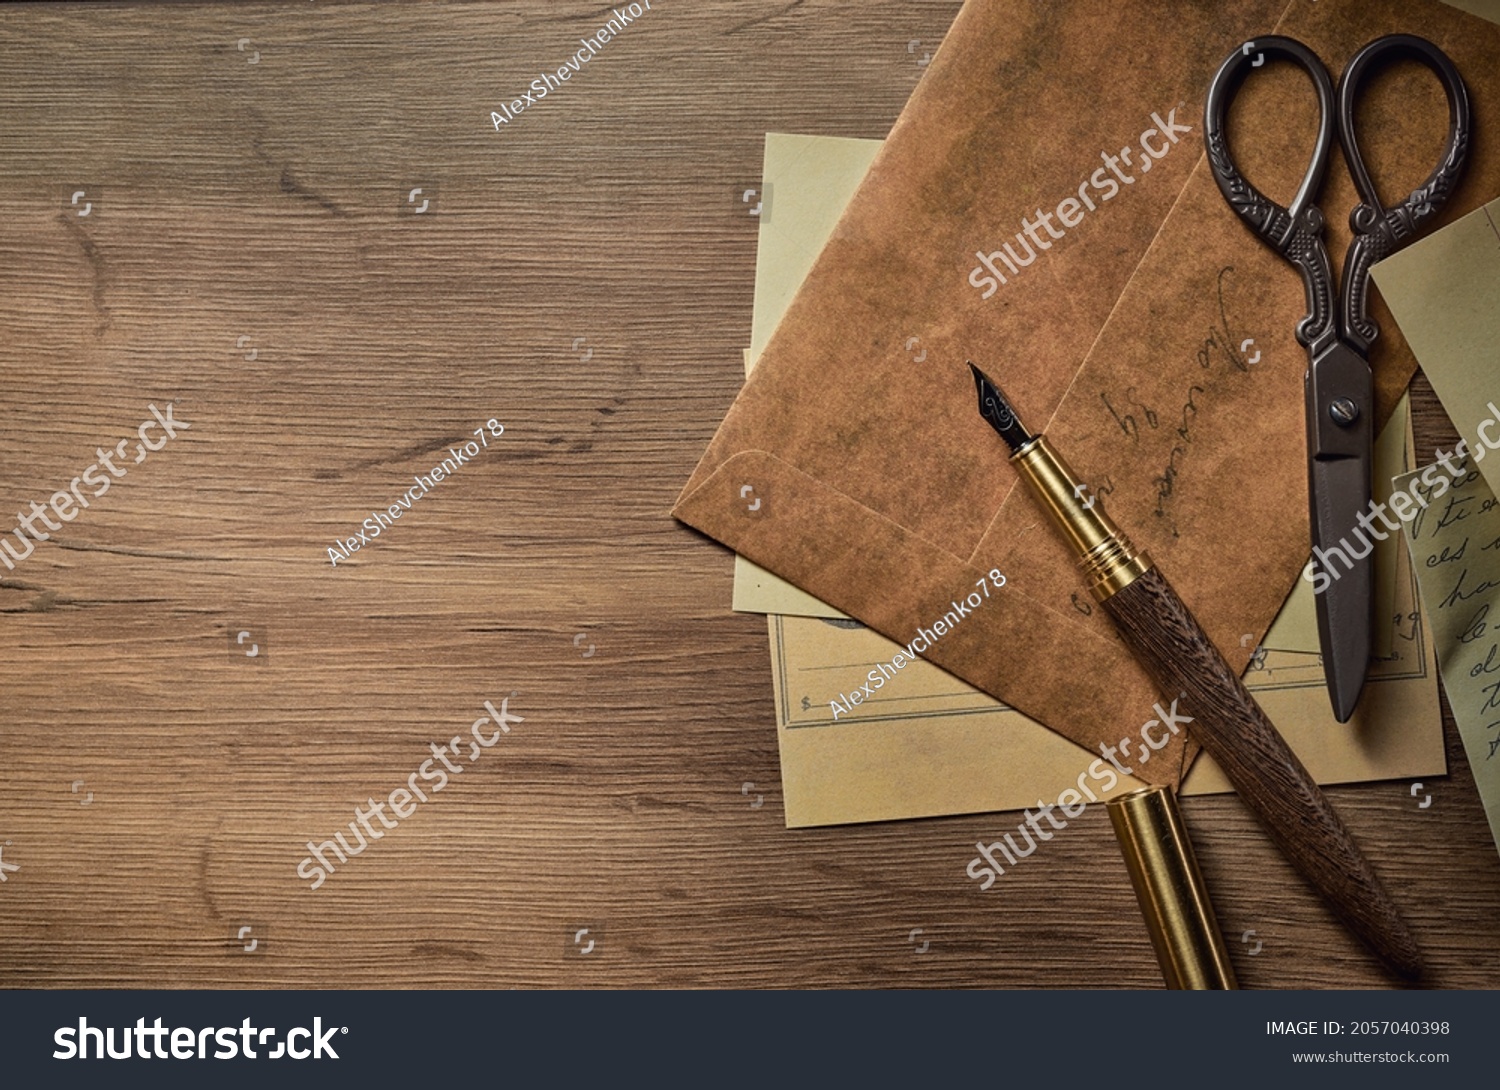 Vintage writing utensils on a wooden table, old watch, papers, letters, envelopes and scissors #2057040398